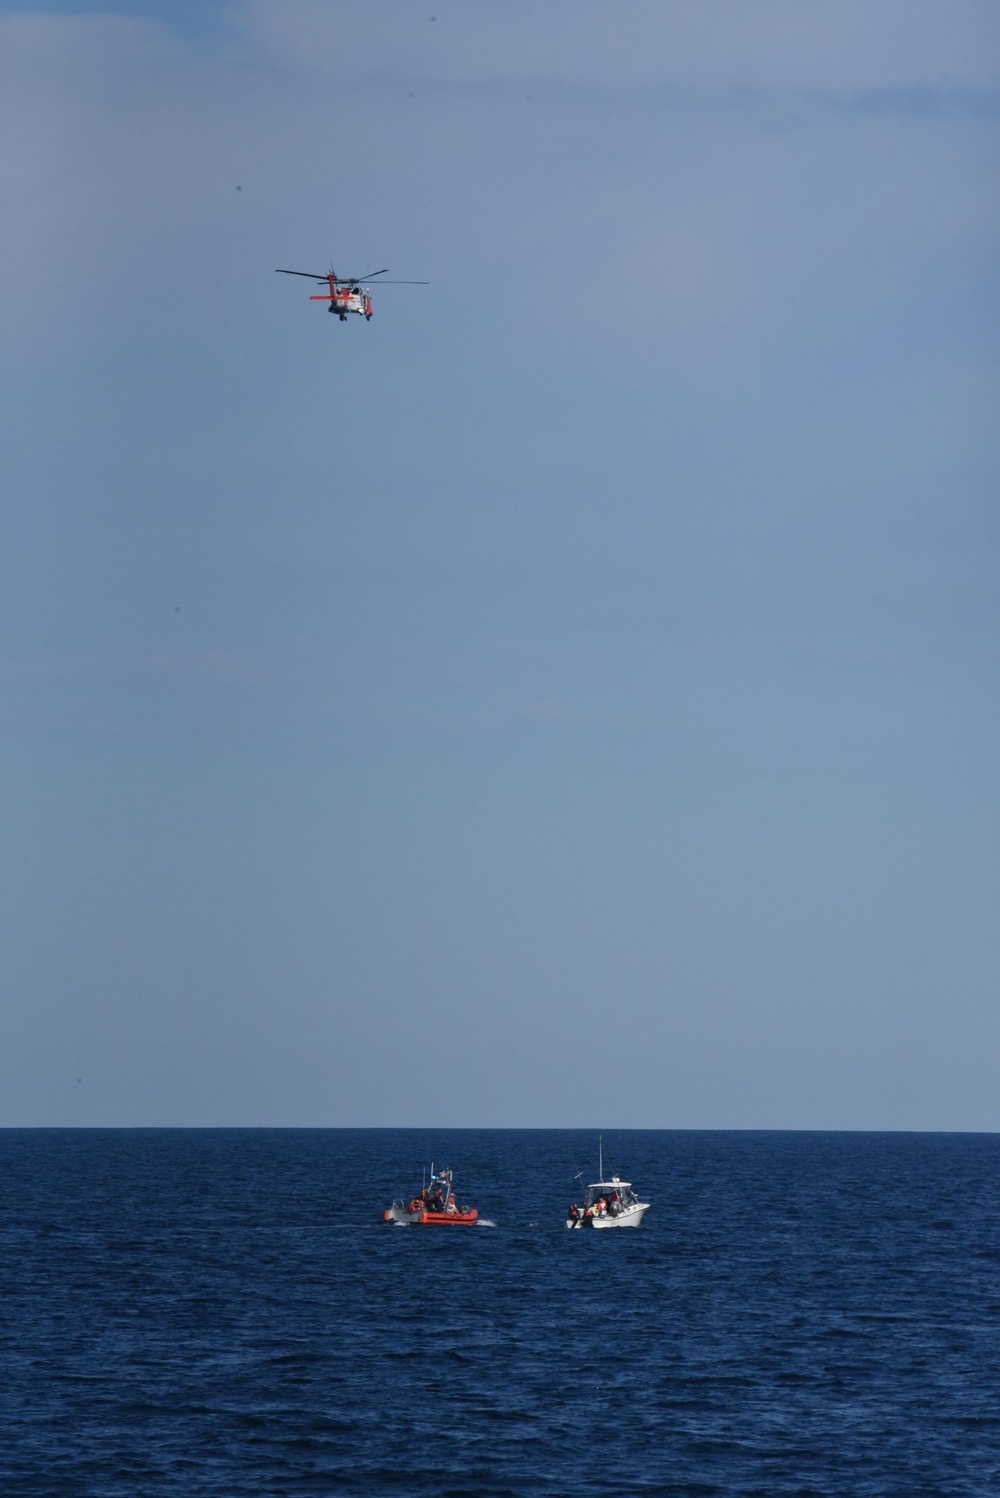 Coast Guard dewaters, tows sinking boat with 4 people aboard 32 miles off Wachapreague